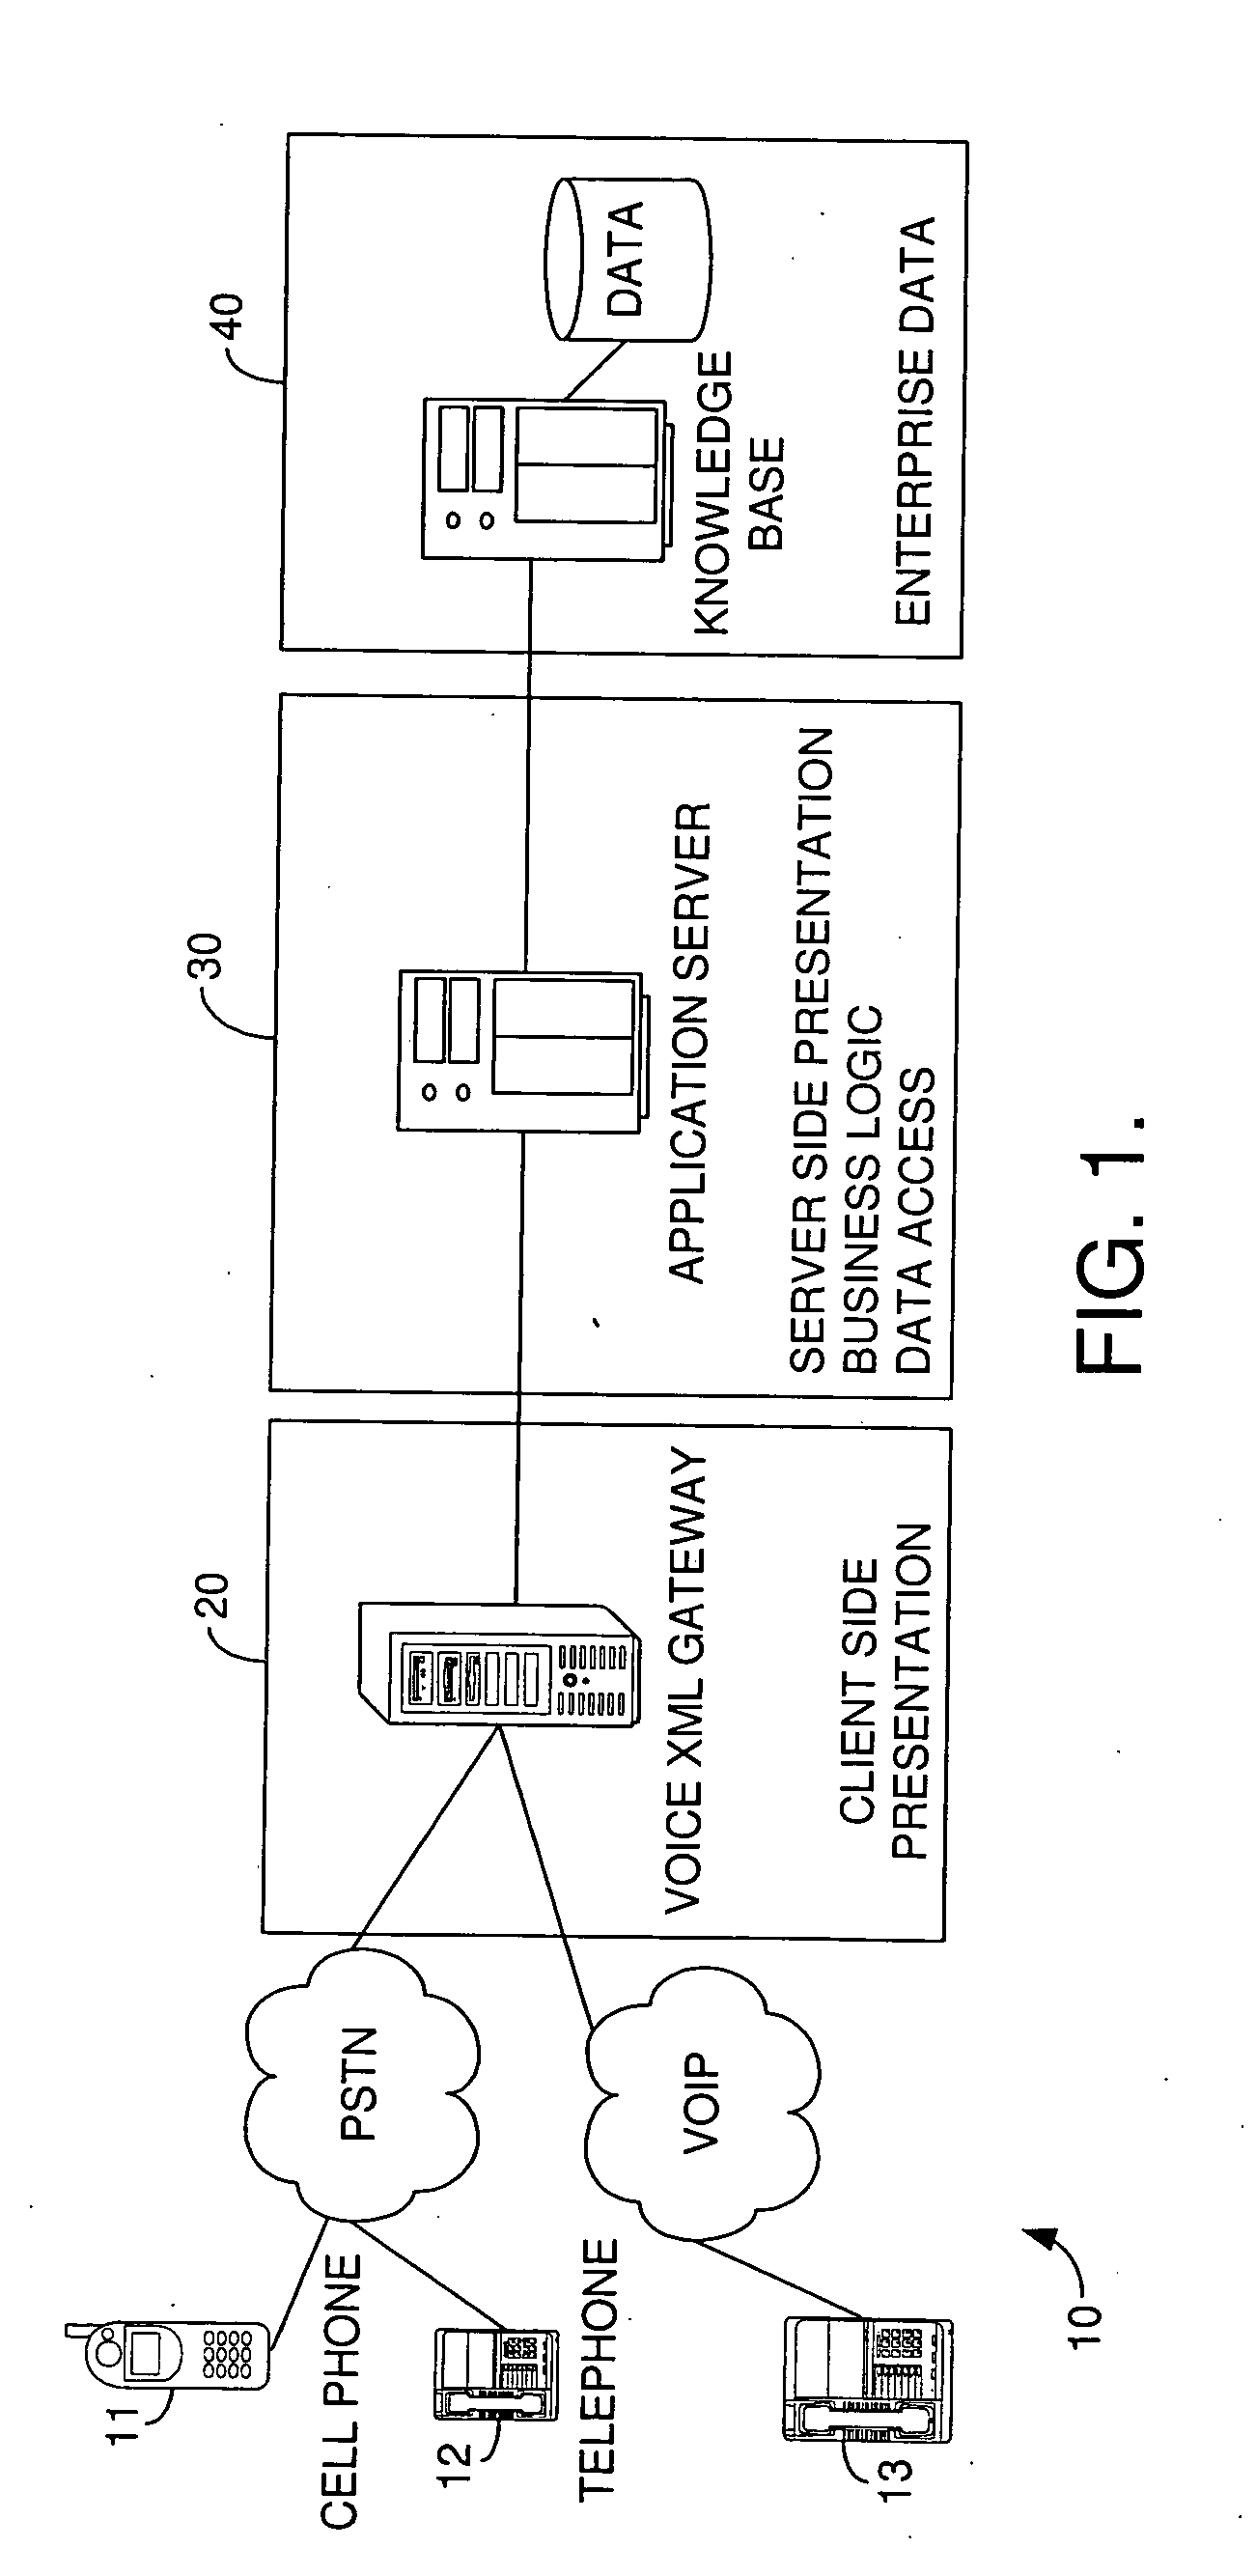 Method of weighting speech recognition grammar responses using knowledge base usage data